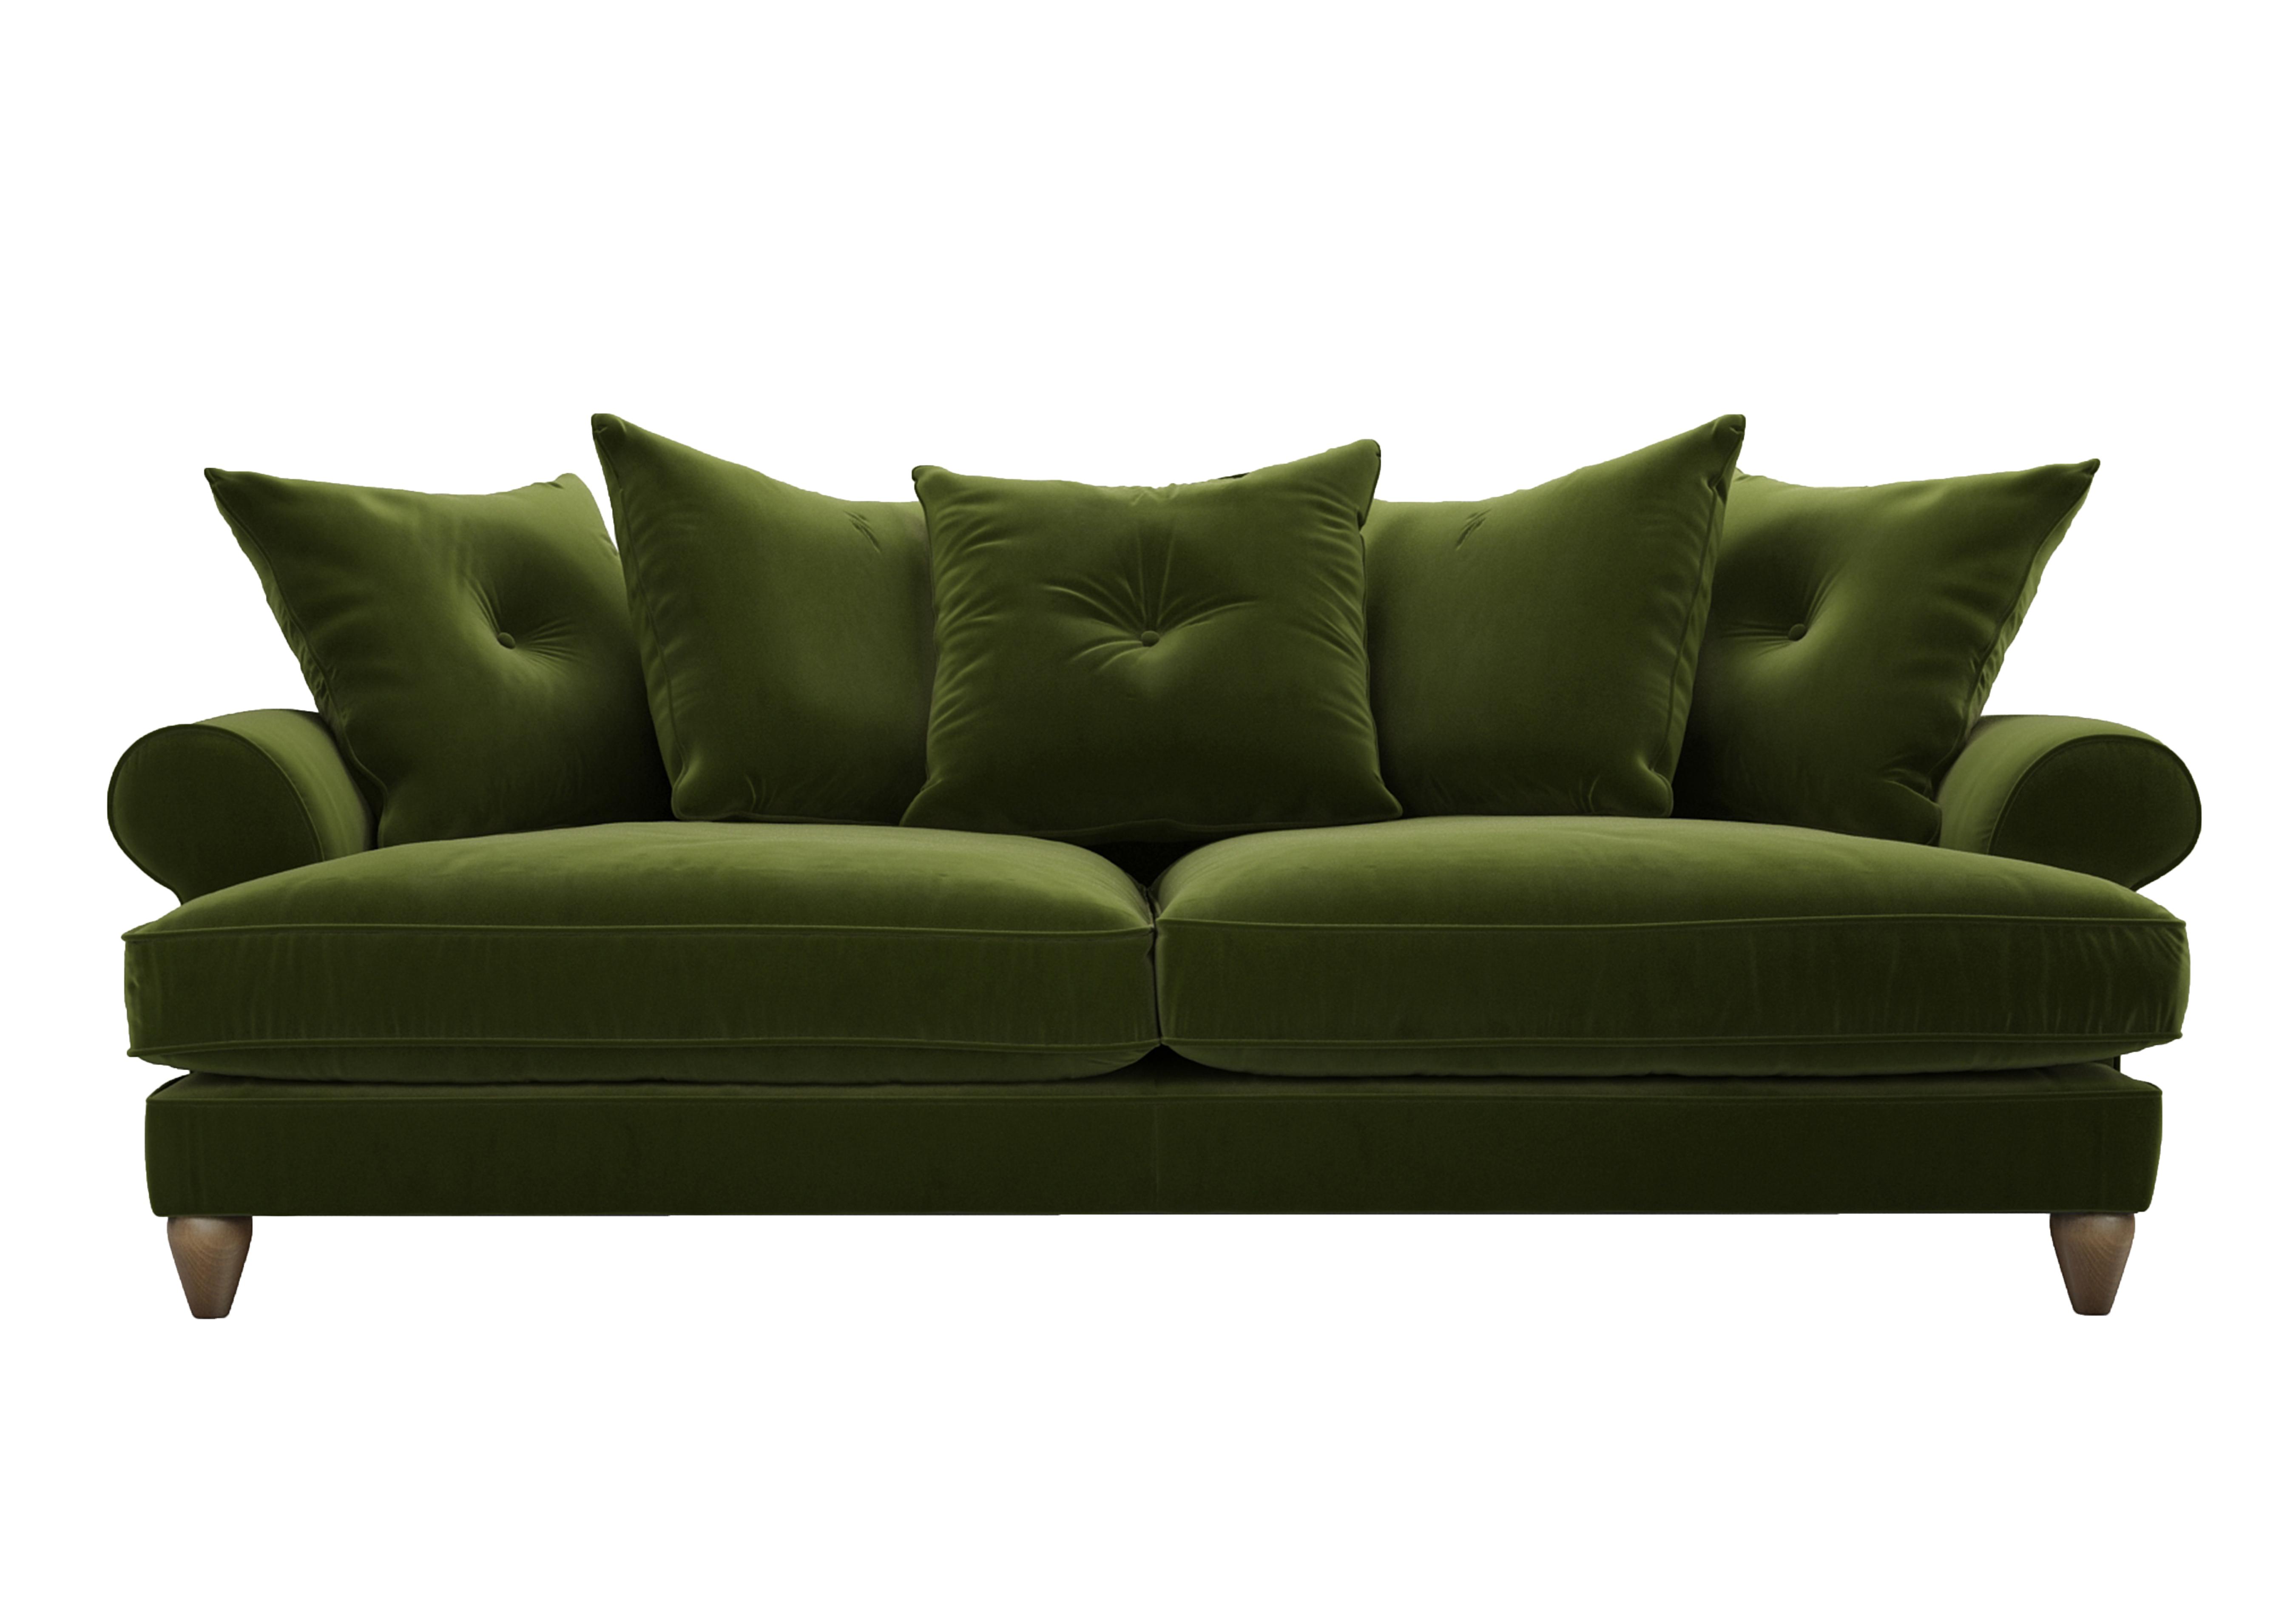 Bronwyn 4 Seater Fabric Scatter Back Sofa in Woo160 Woodland Moss on Furniture Village